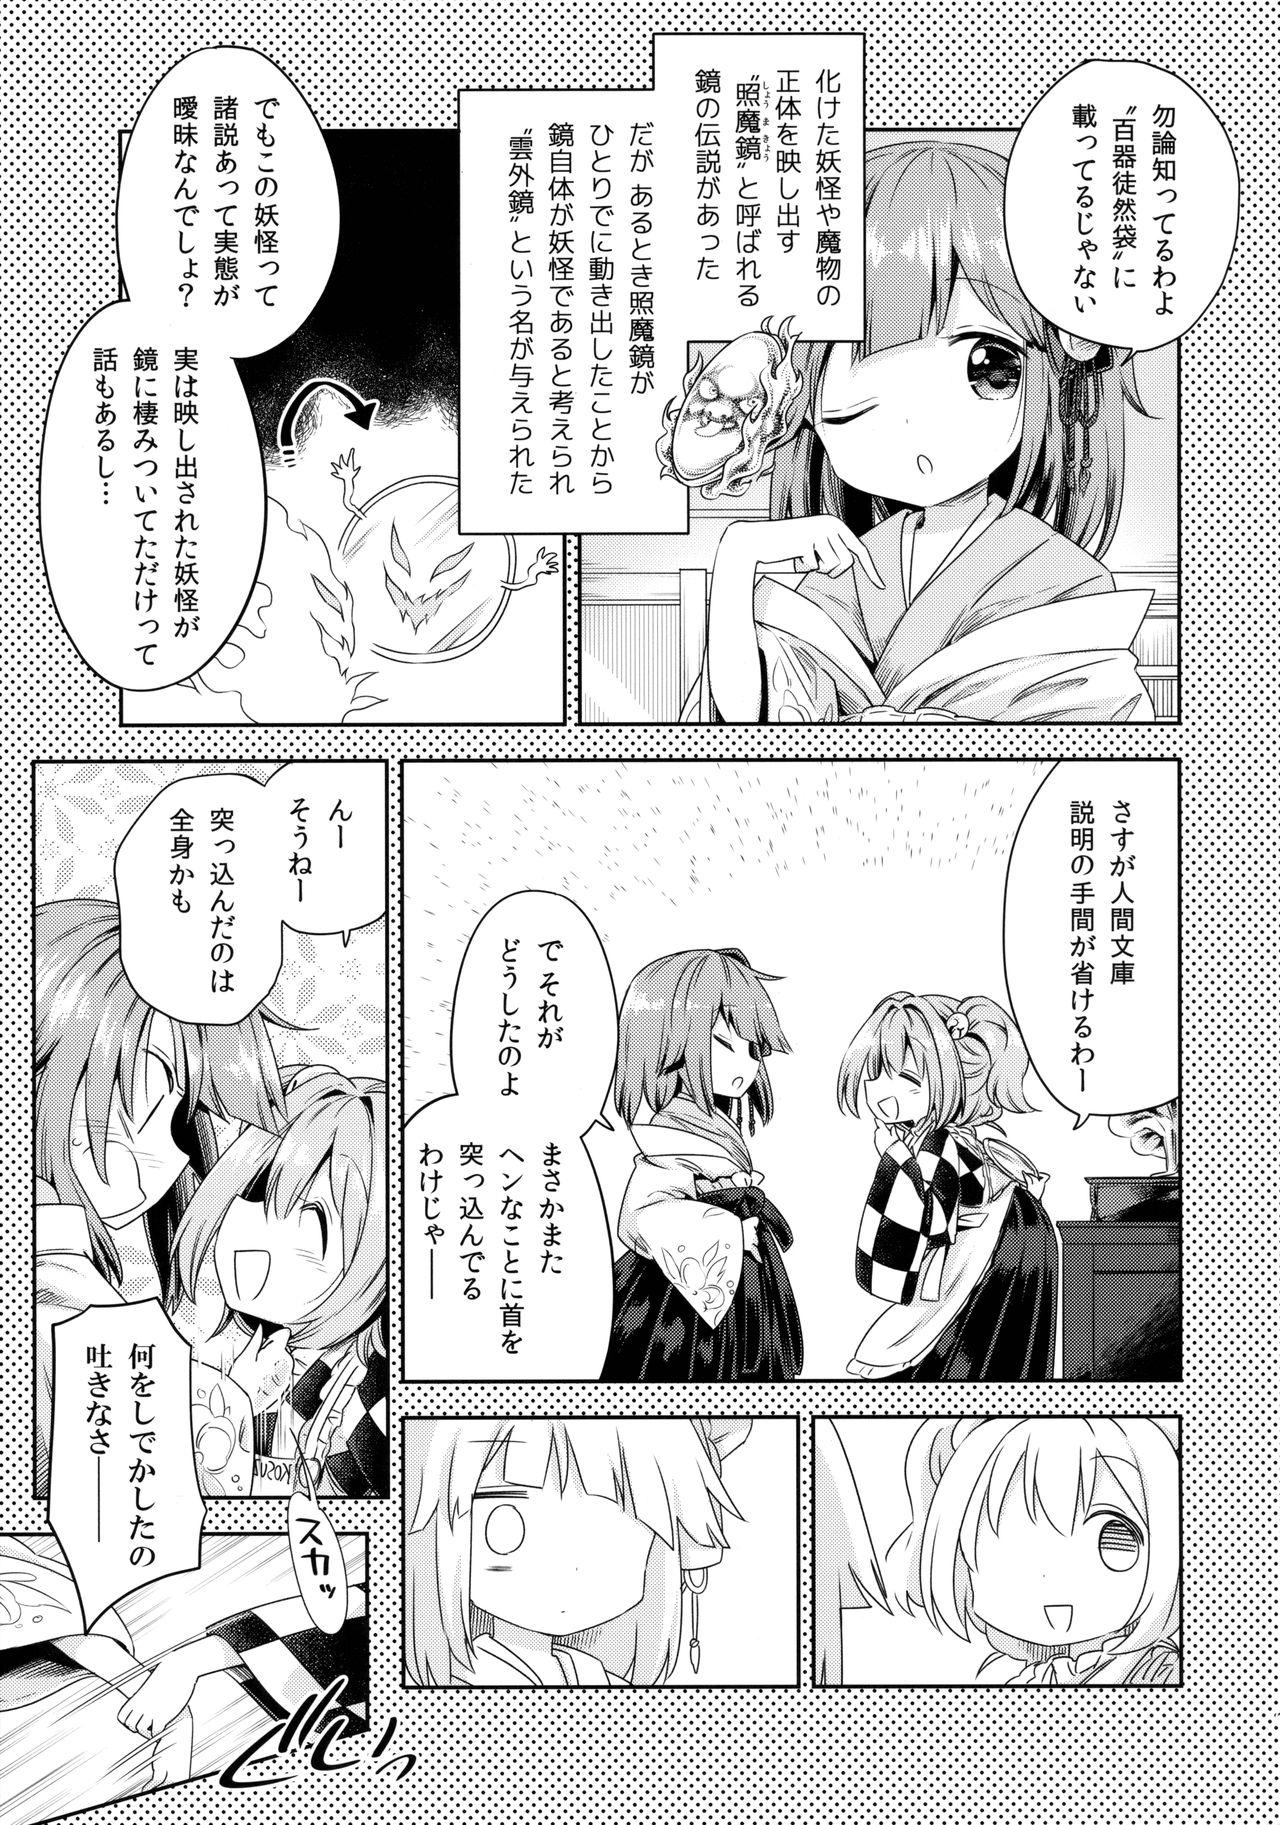 Pure 18 Houga Asobi - Touhou project Unshaved - Page 6